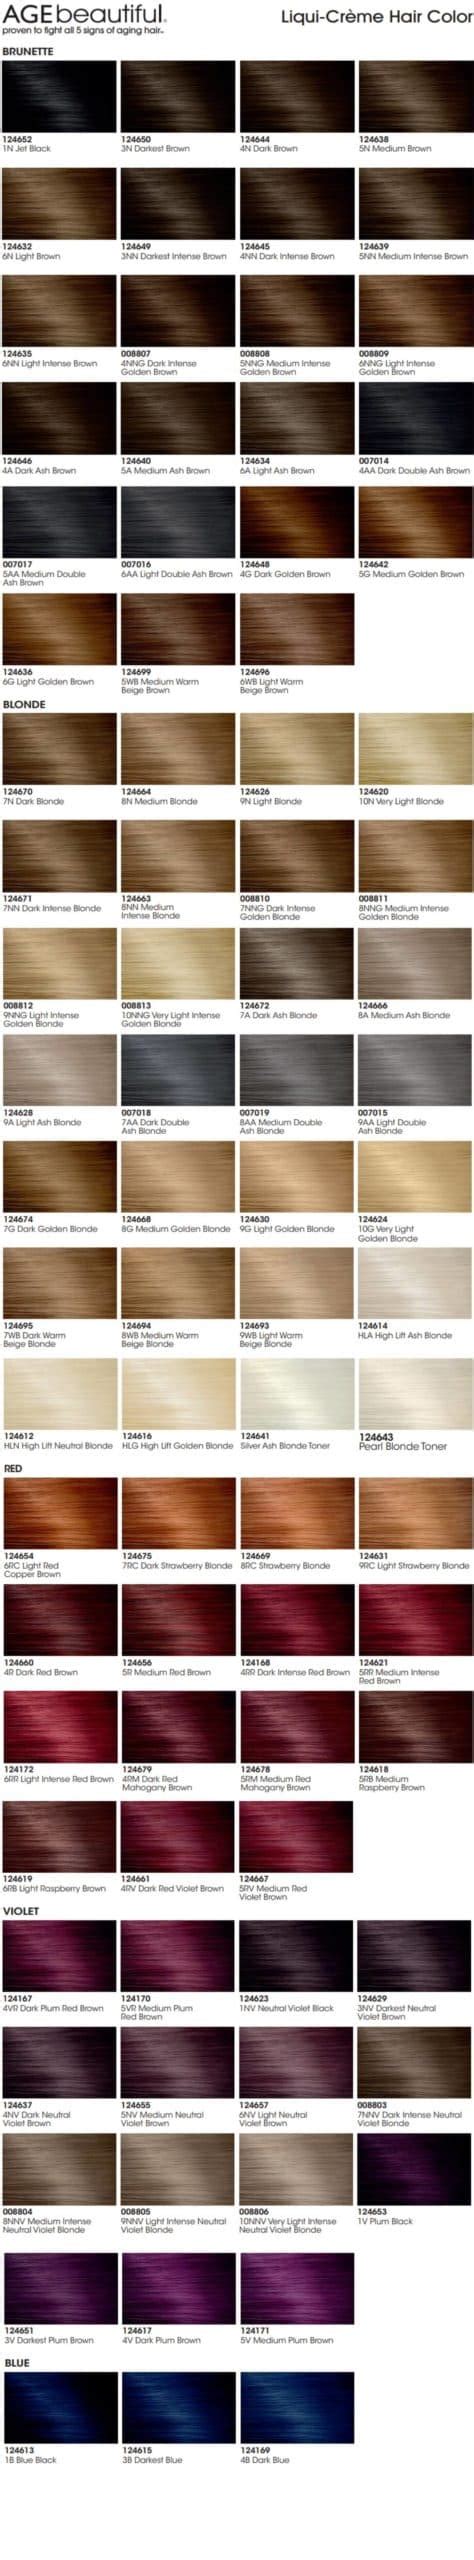 Jan 27, 2019 - AGEbeautiful hair color shade chart to compare over 70 hair dye options including black, brown, blue, red, violet and blonde. Find your perfect hair color today. 